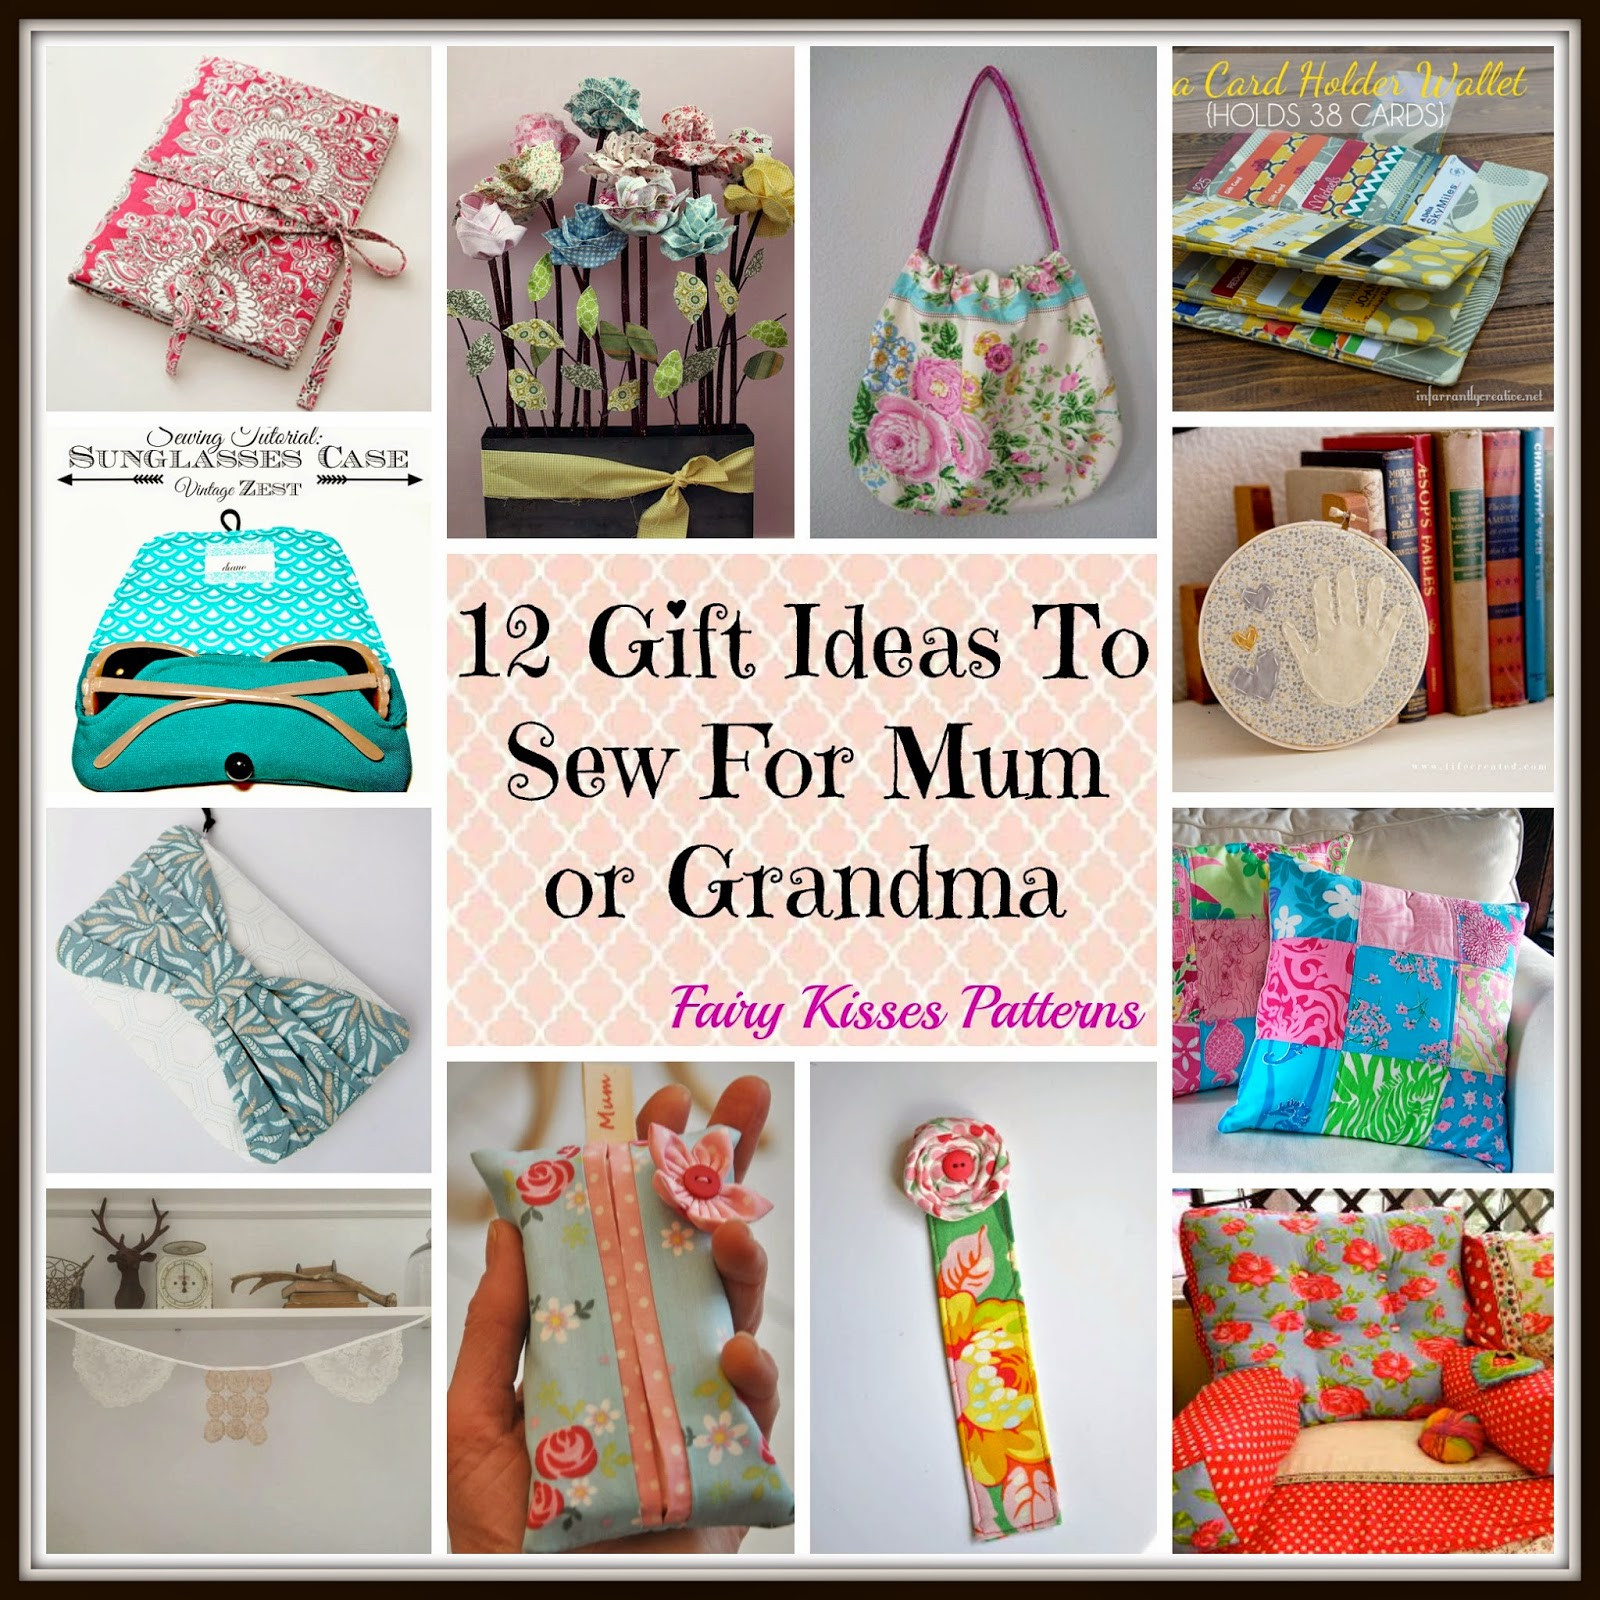 Mother's Day Gift Ideas For Grandmother
 Fairy Kisses Gift Ideas To Sew For Mum or Grandma